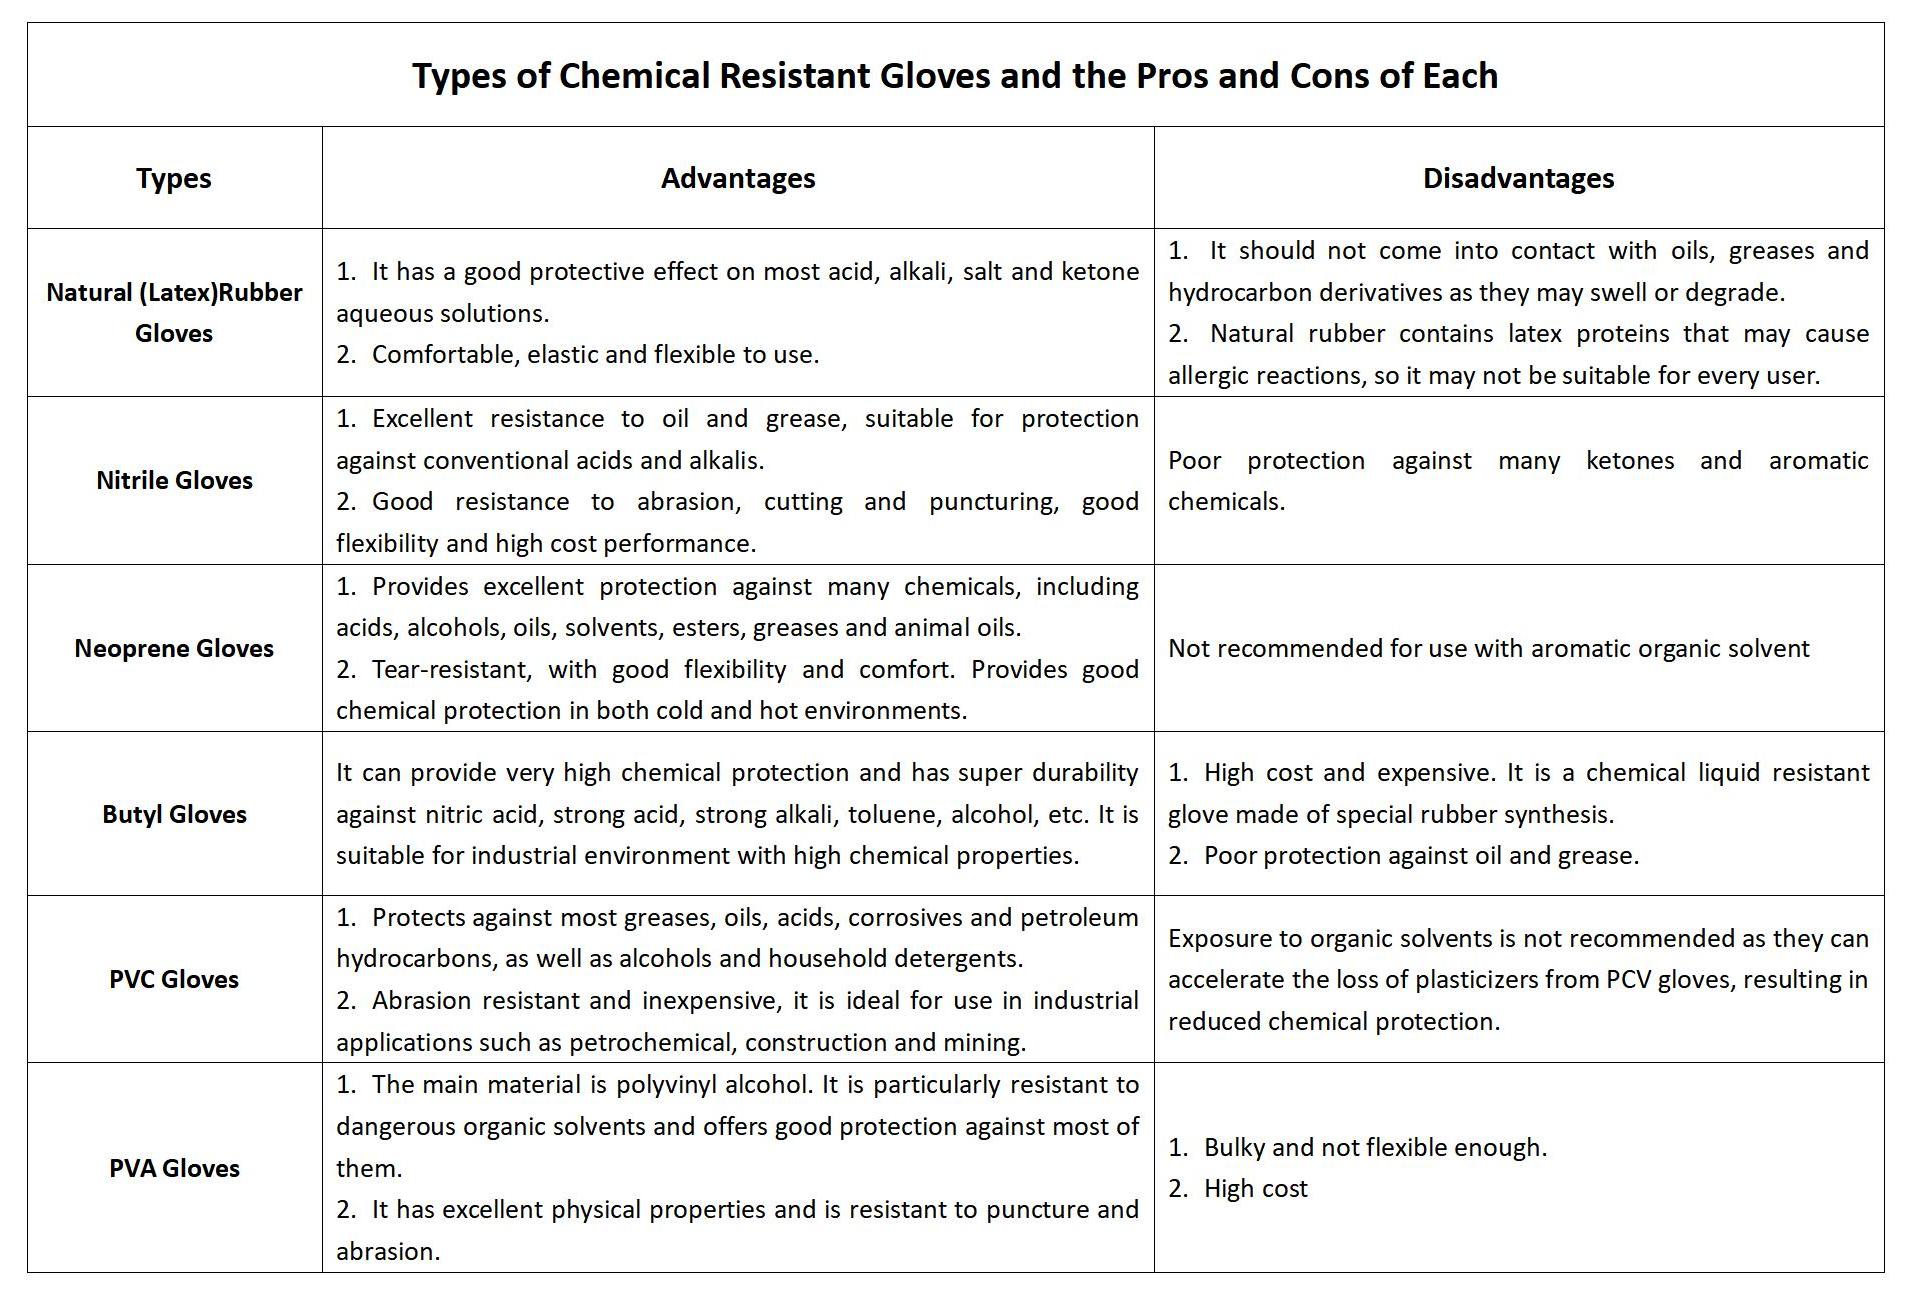 Types of Chemical Resistant Gloves